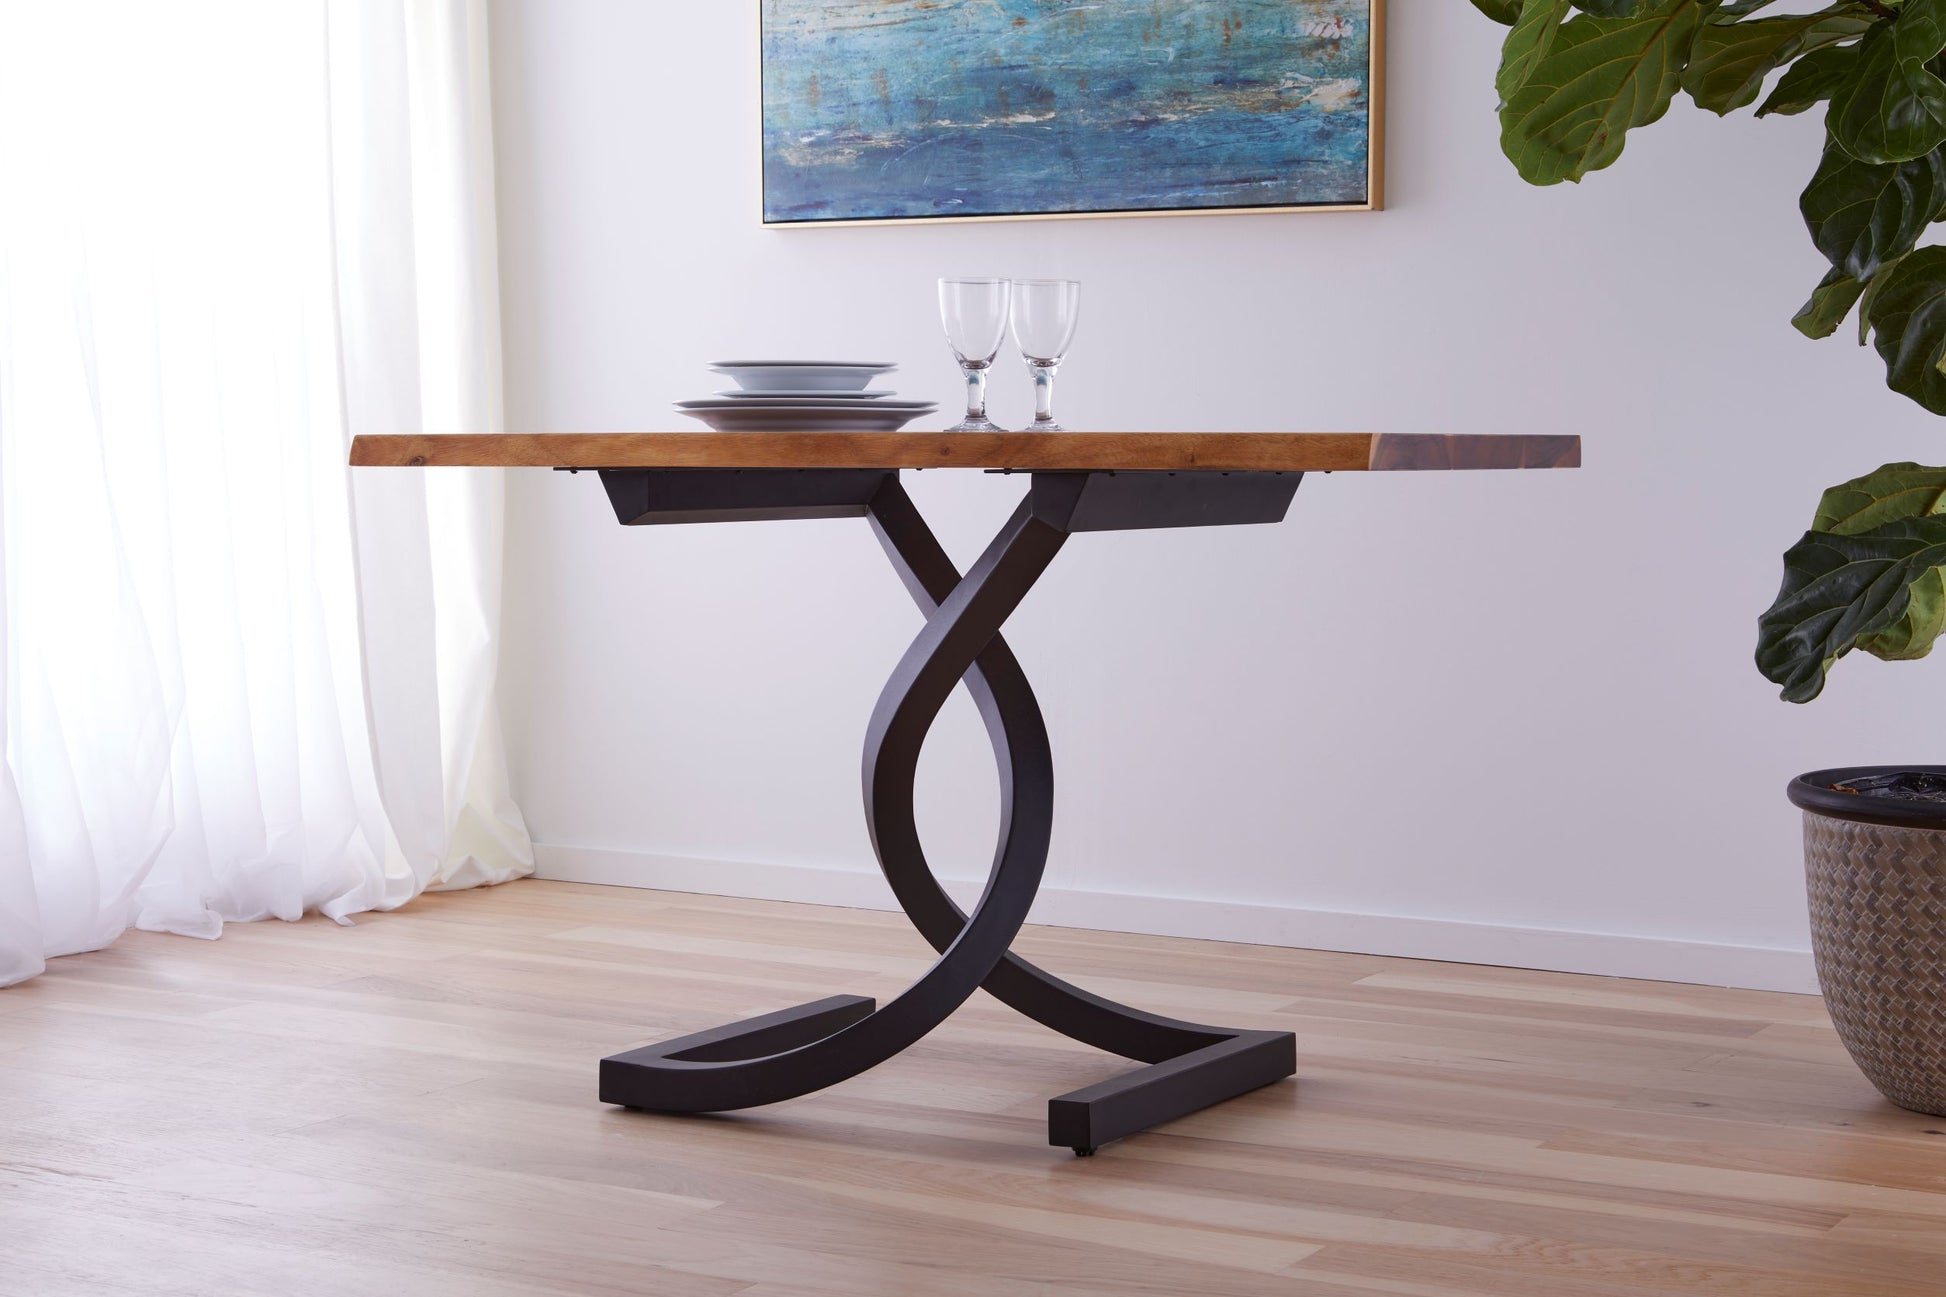 Choosing A Table Base For A Granite Or Marble Table Top